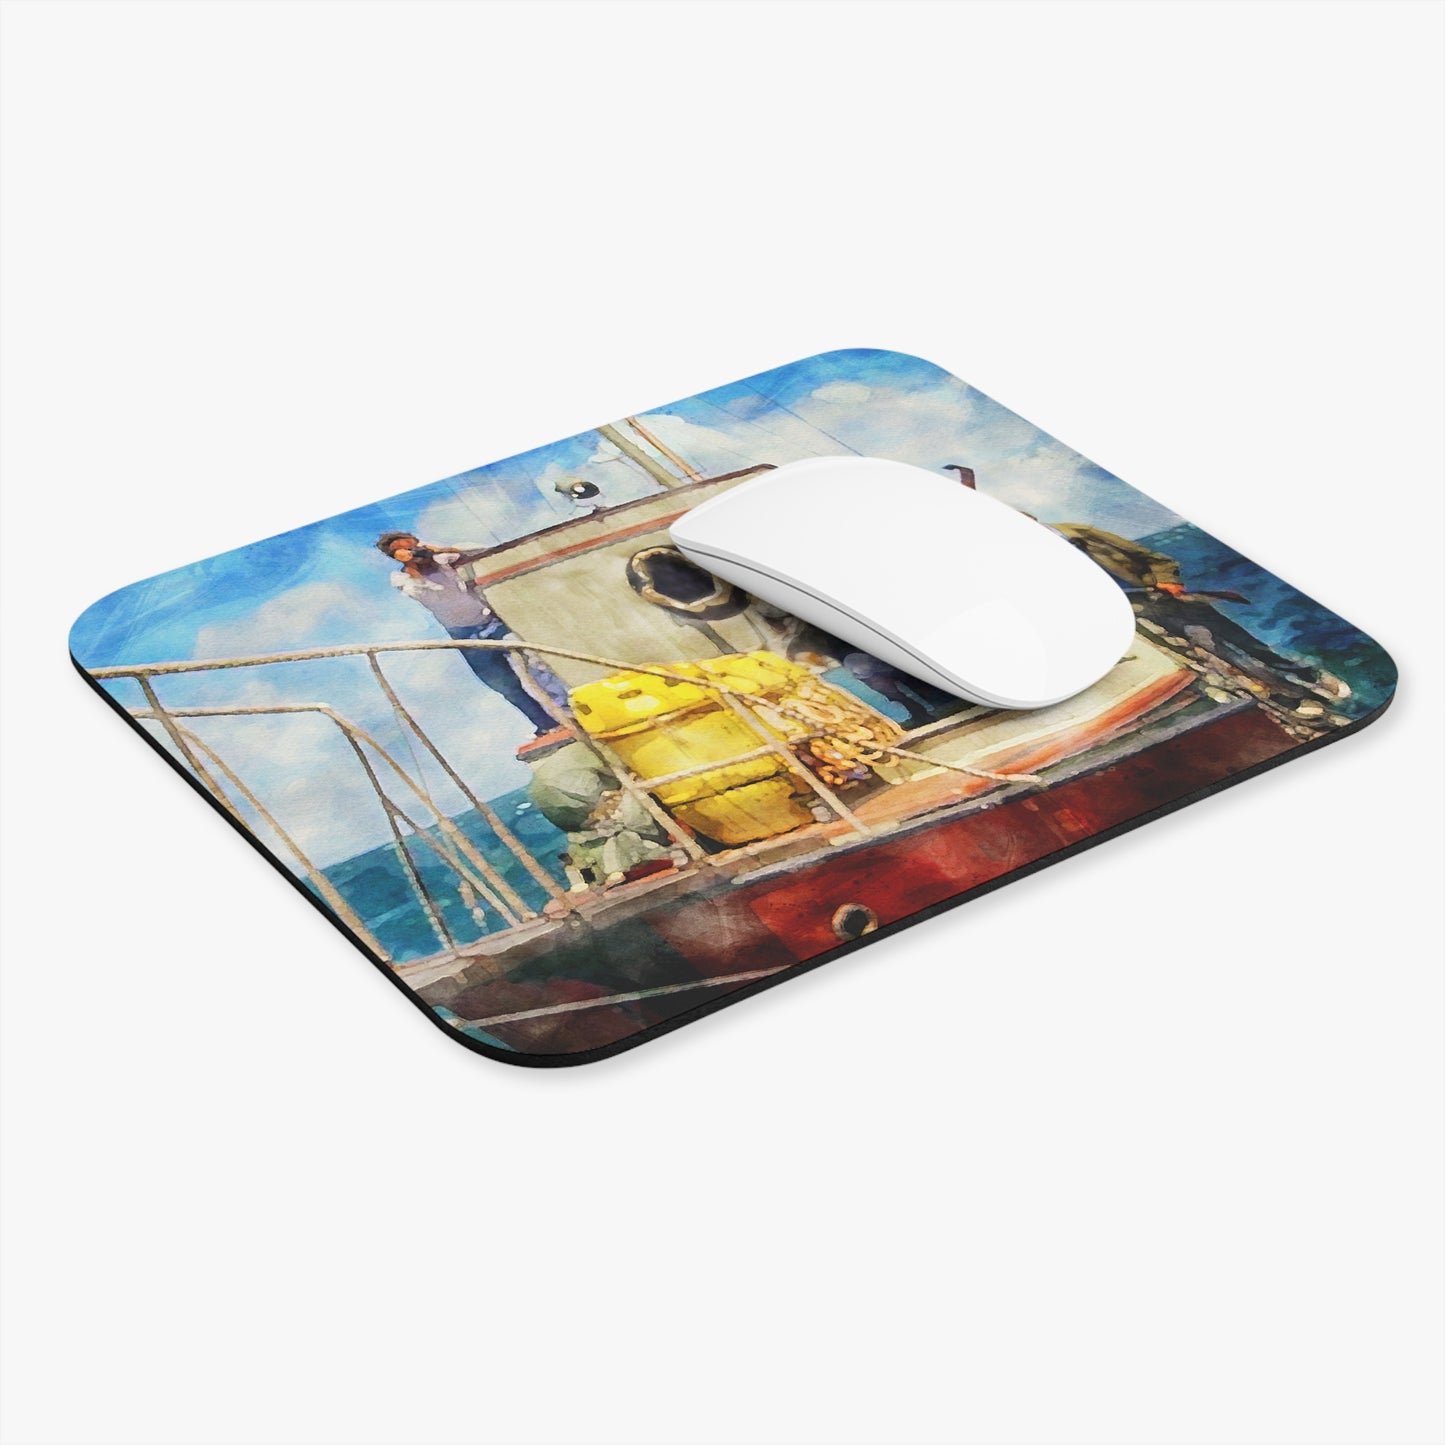 Jaws Inspired "Shark Hunting" Mouse Pad - 9x8